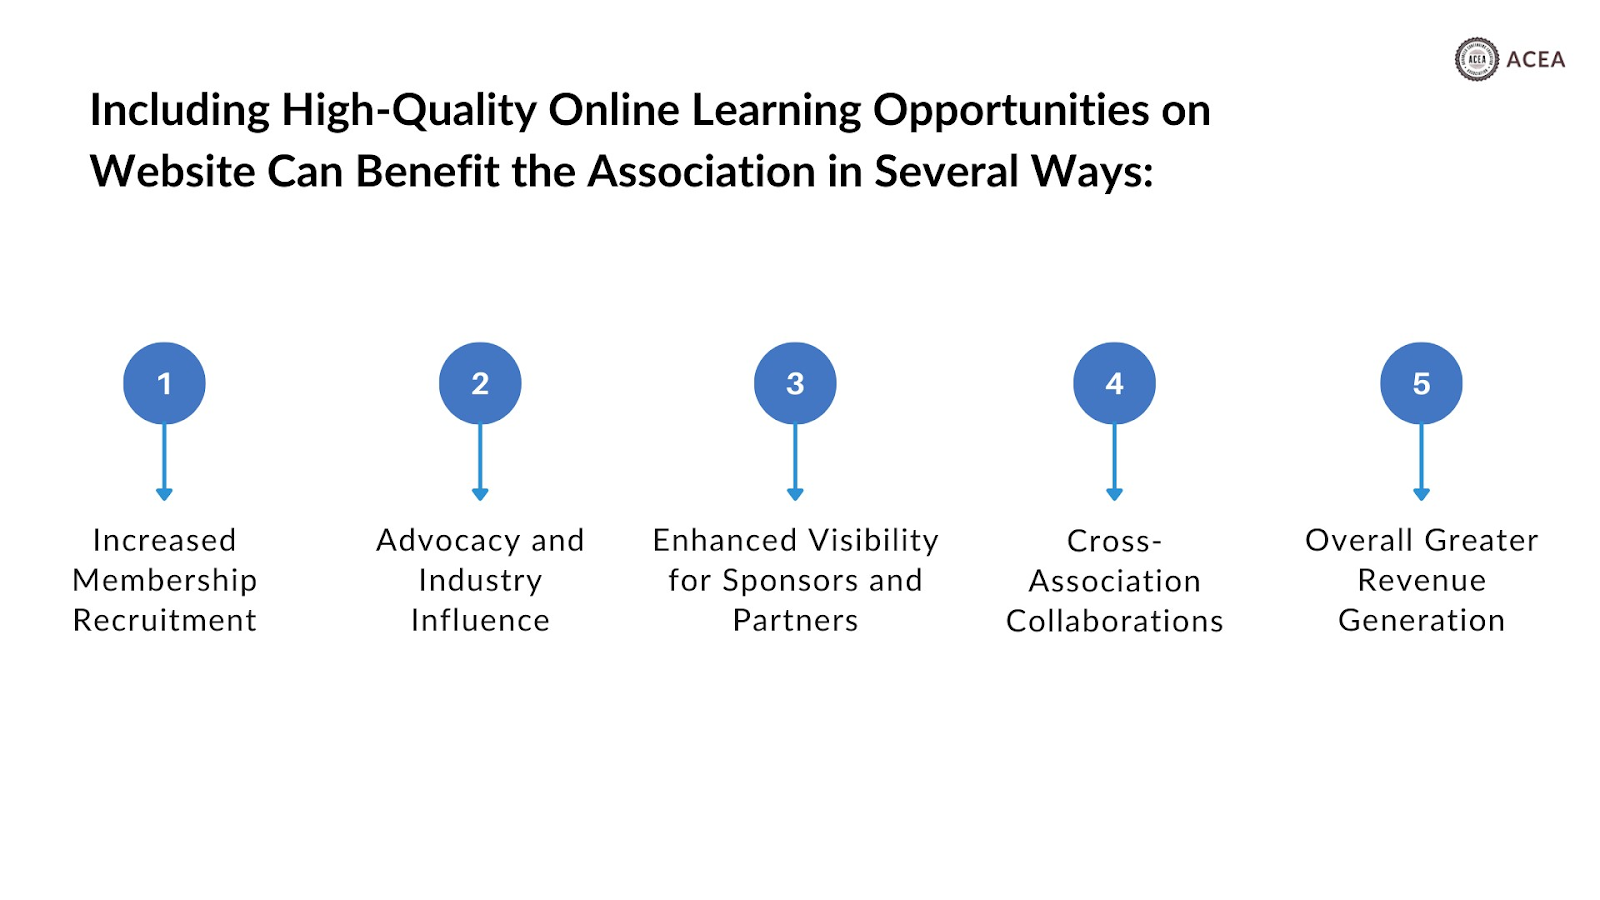 Benefits of providing high quality online learning opportunities for associations